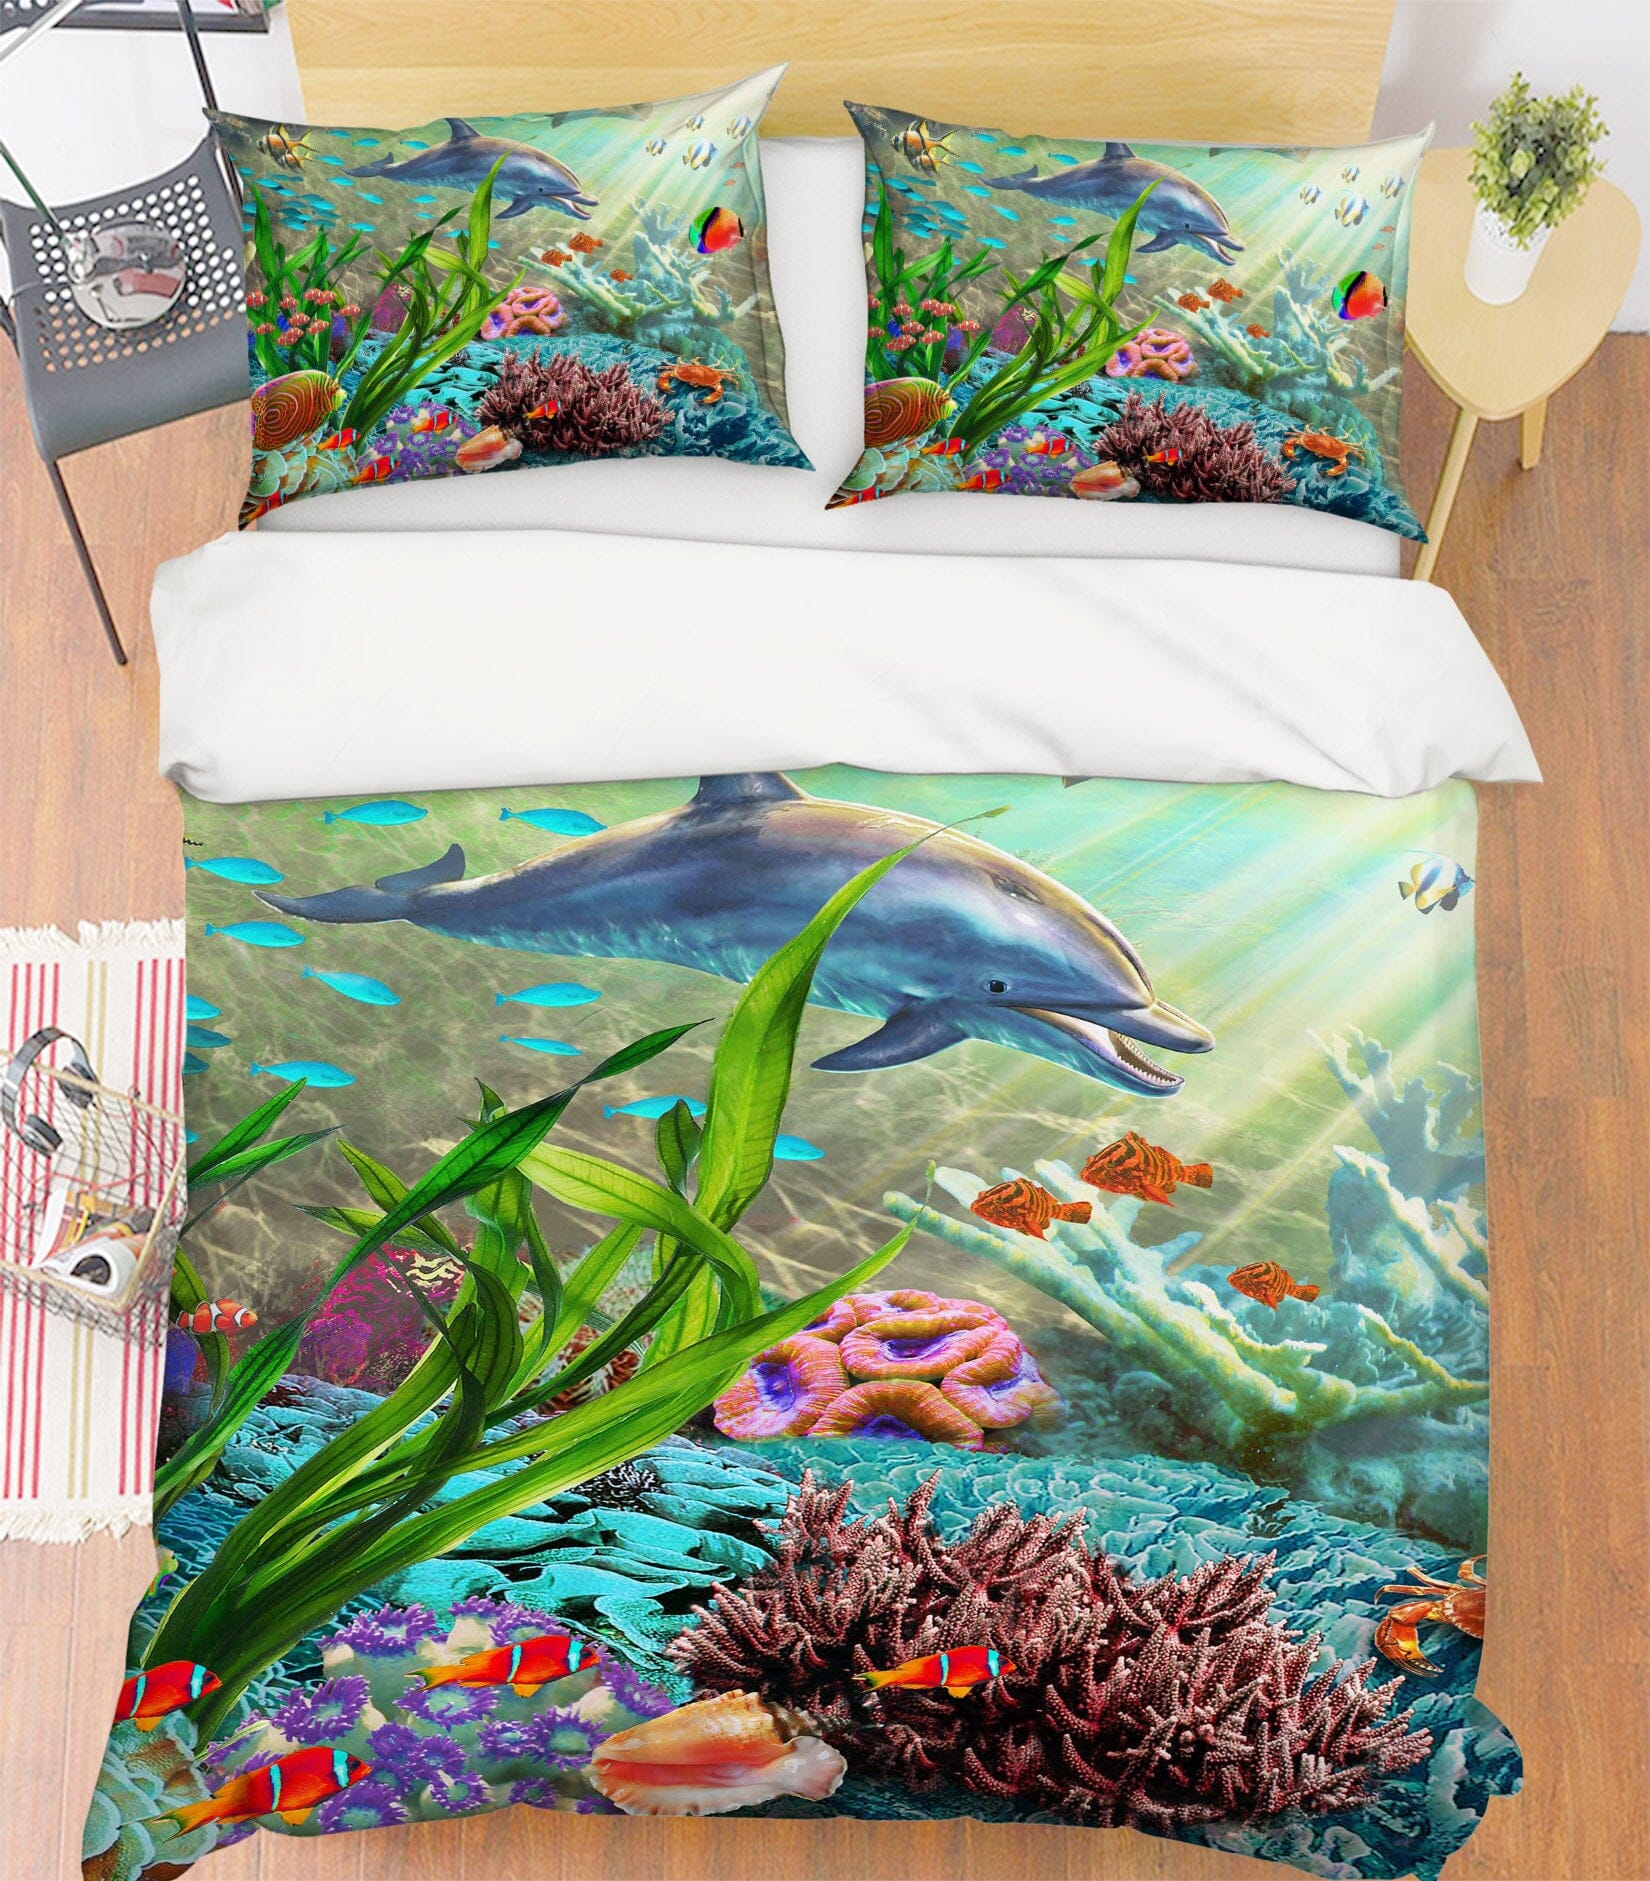 3D Cute Dolphin 2115 Adrian Chesterman Bedding Bed Pillowcases Quilt Quiet Covers AJ Creativity Home 